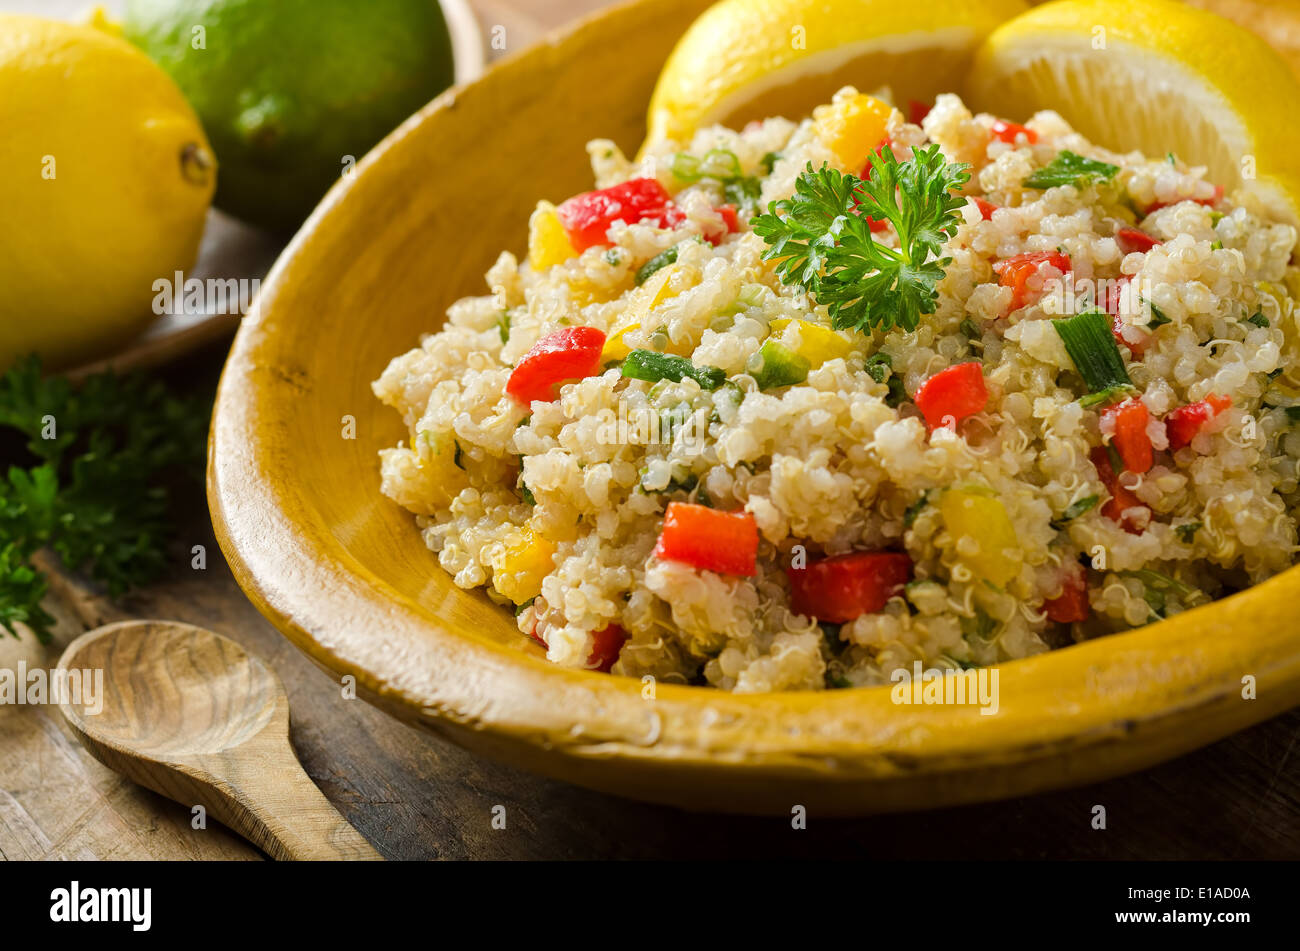 A healthy delicious quinoa salad with lemon, lime, red pepper, yellow pepper, green onion, and parsley. Stock Photo